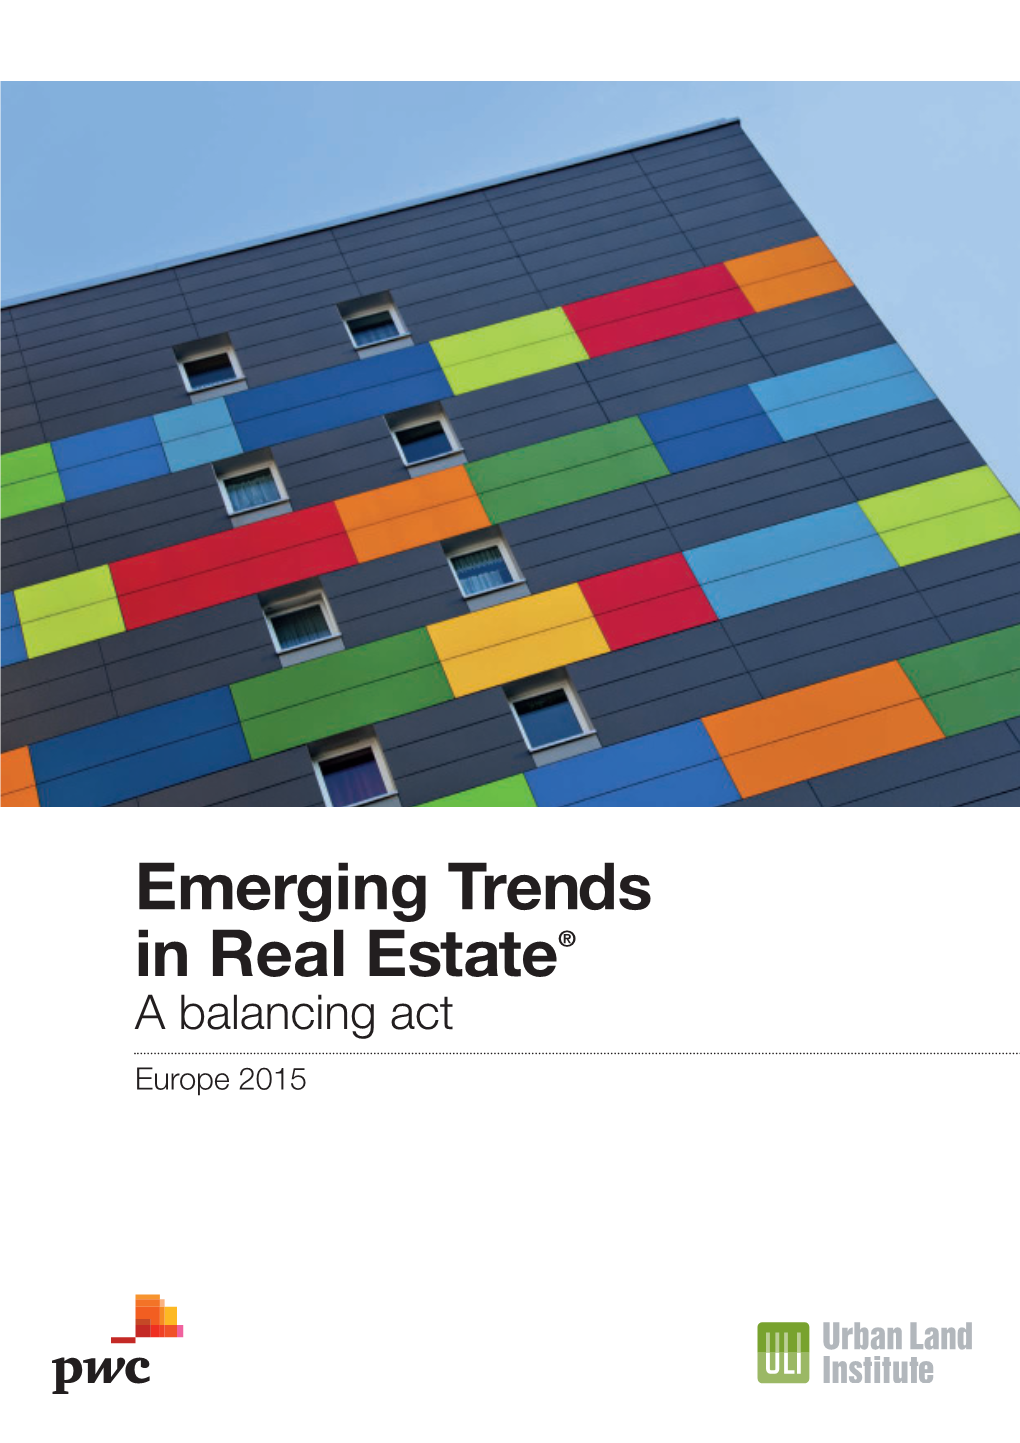 Emerging Trends in Real Estate® a Balancing Act Europe 2015 Contents 24 Chapter 3 Markets to Watch 4 Chapter 1 Business Environment